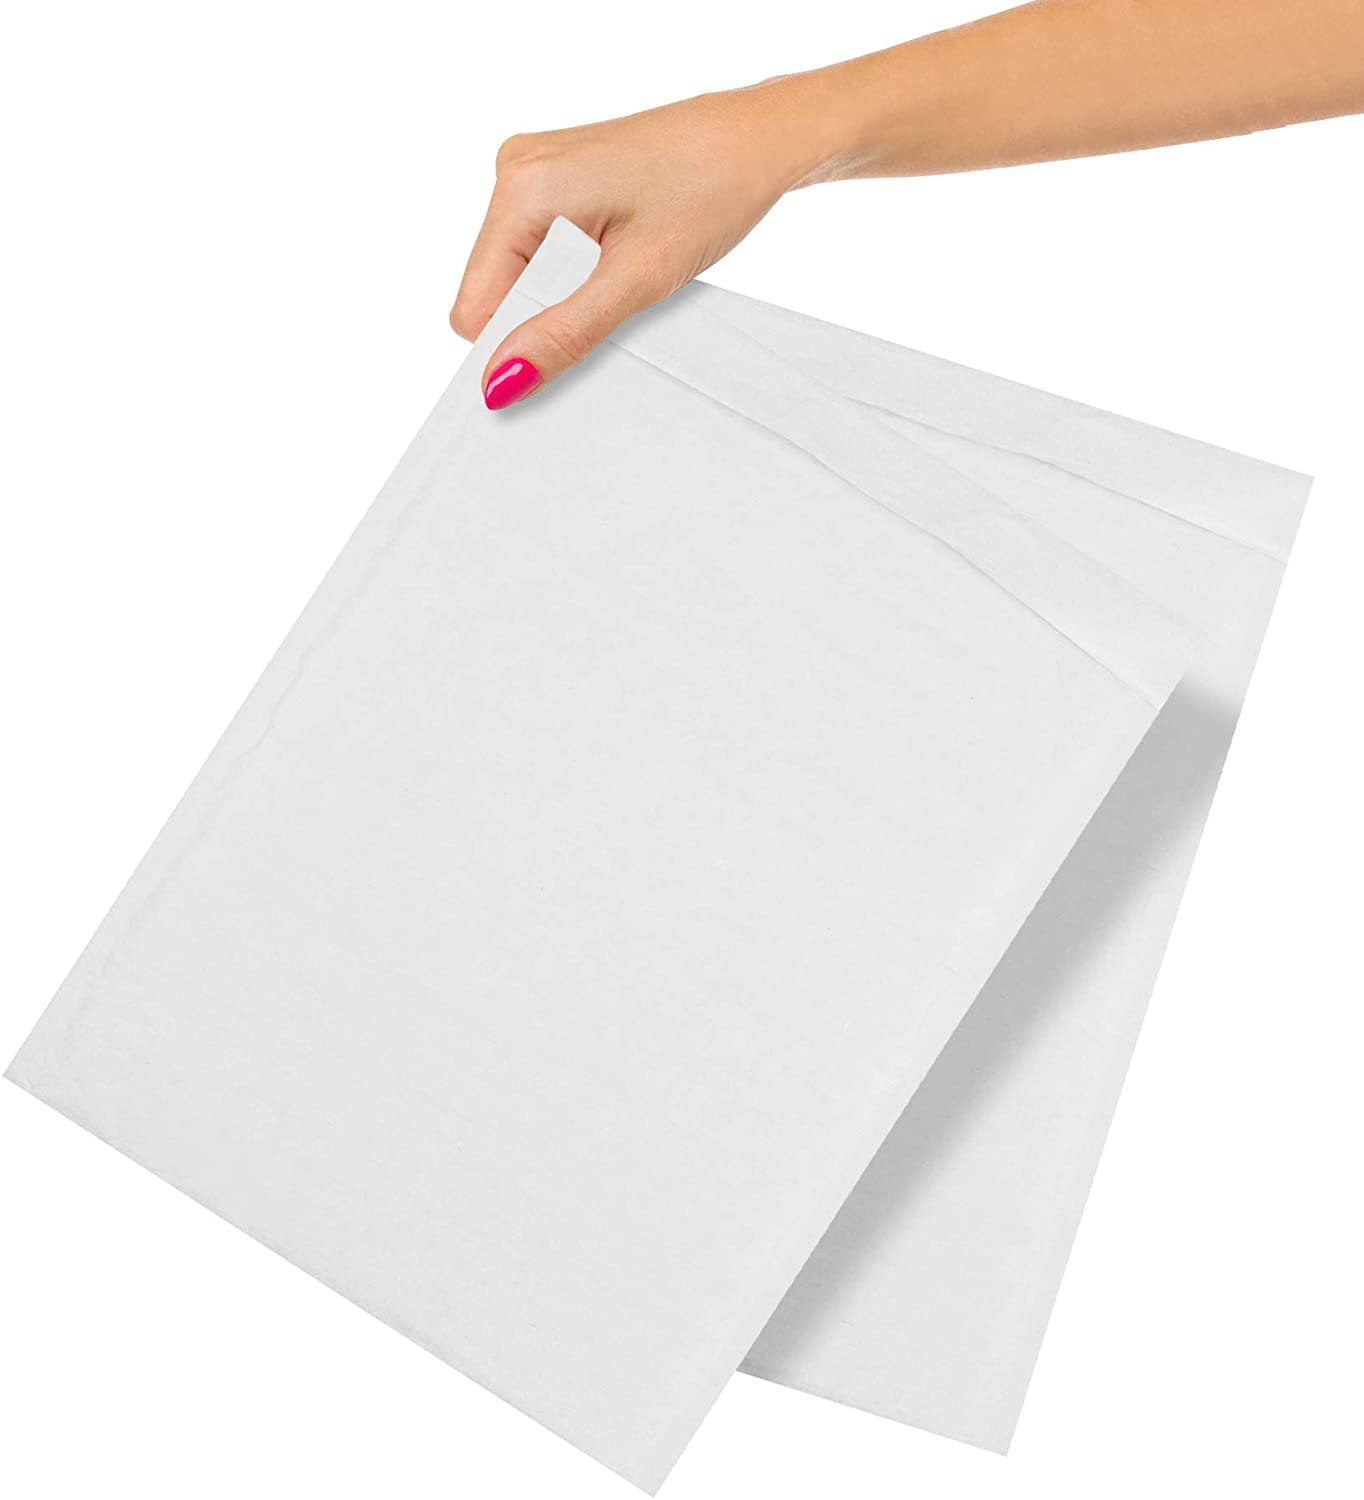 A Carton Bubble Padded Postal Mailer/Peel&Seal Lined Envelope/All Size Wholesale